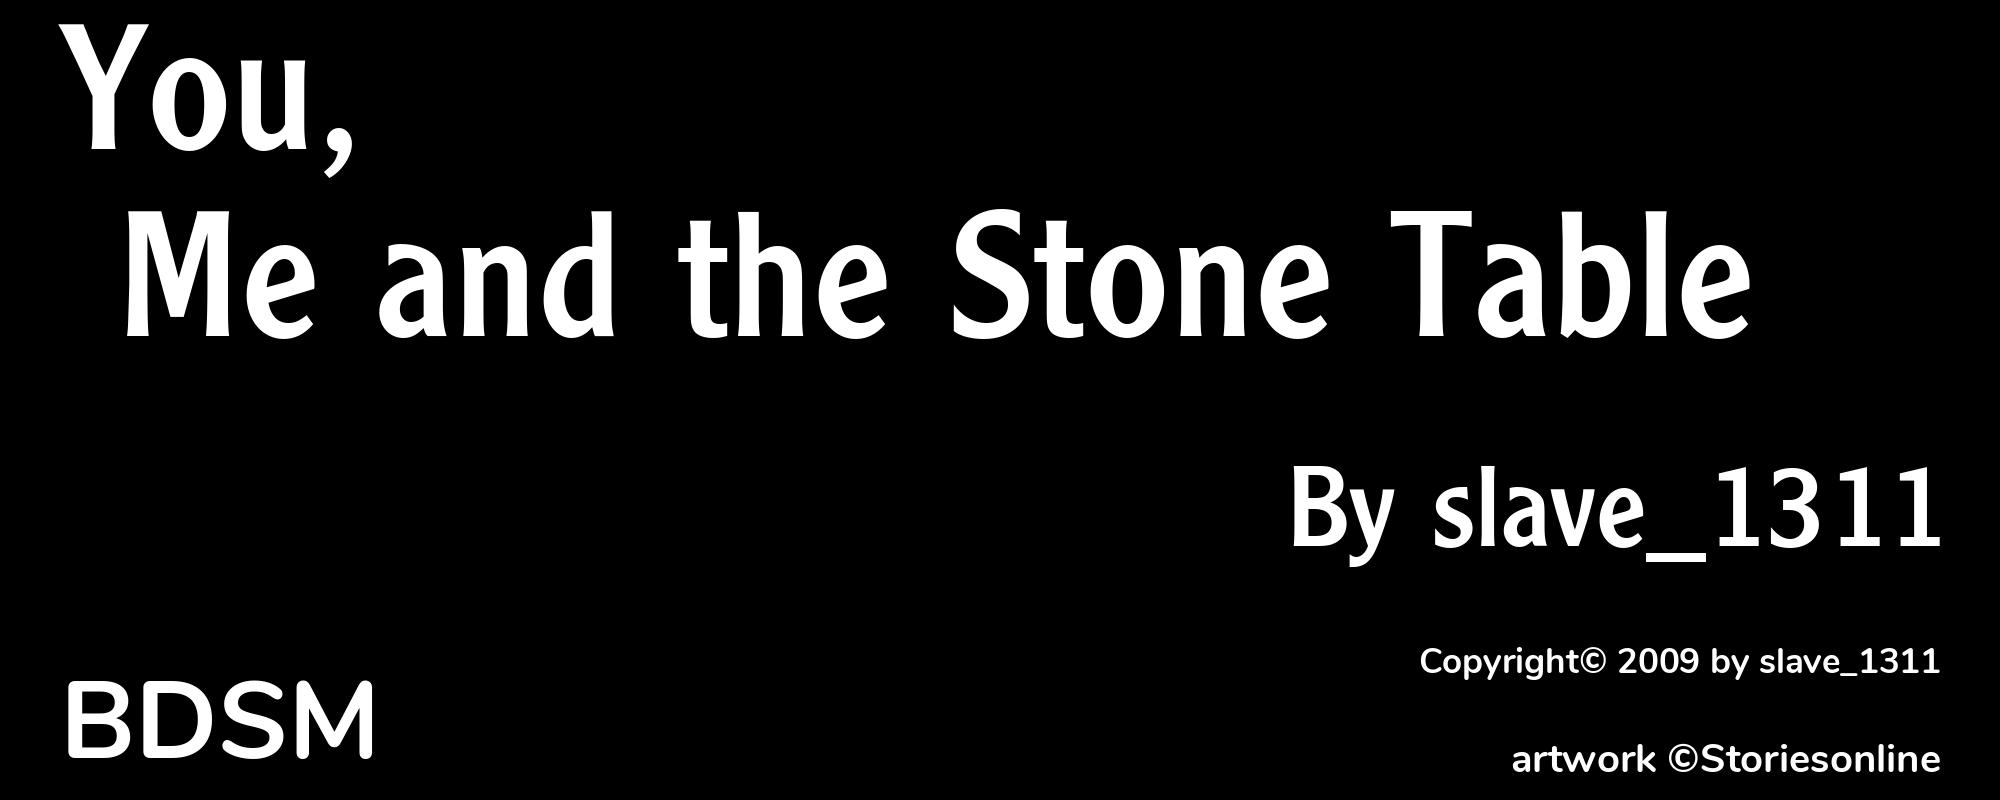 You, Me and the Stone Table - Cover